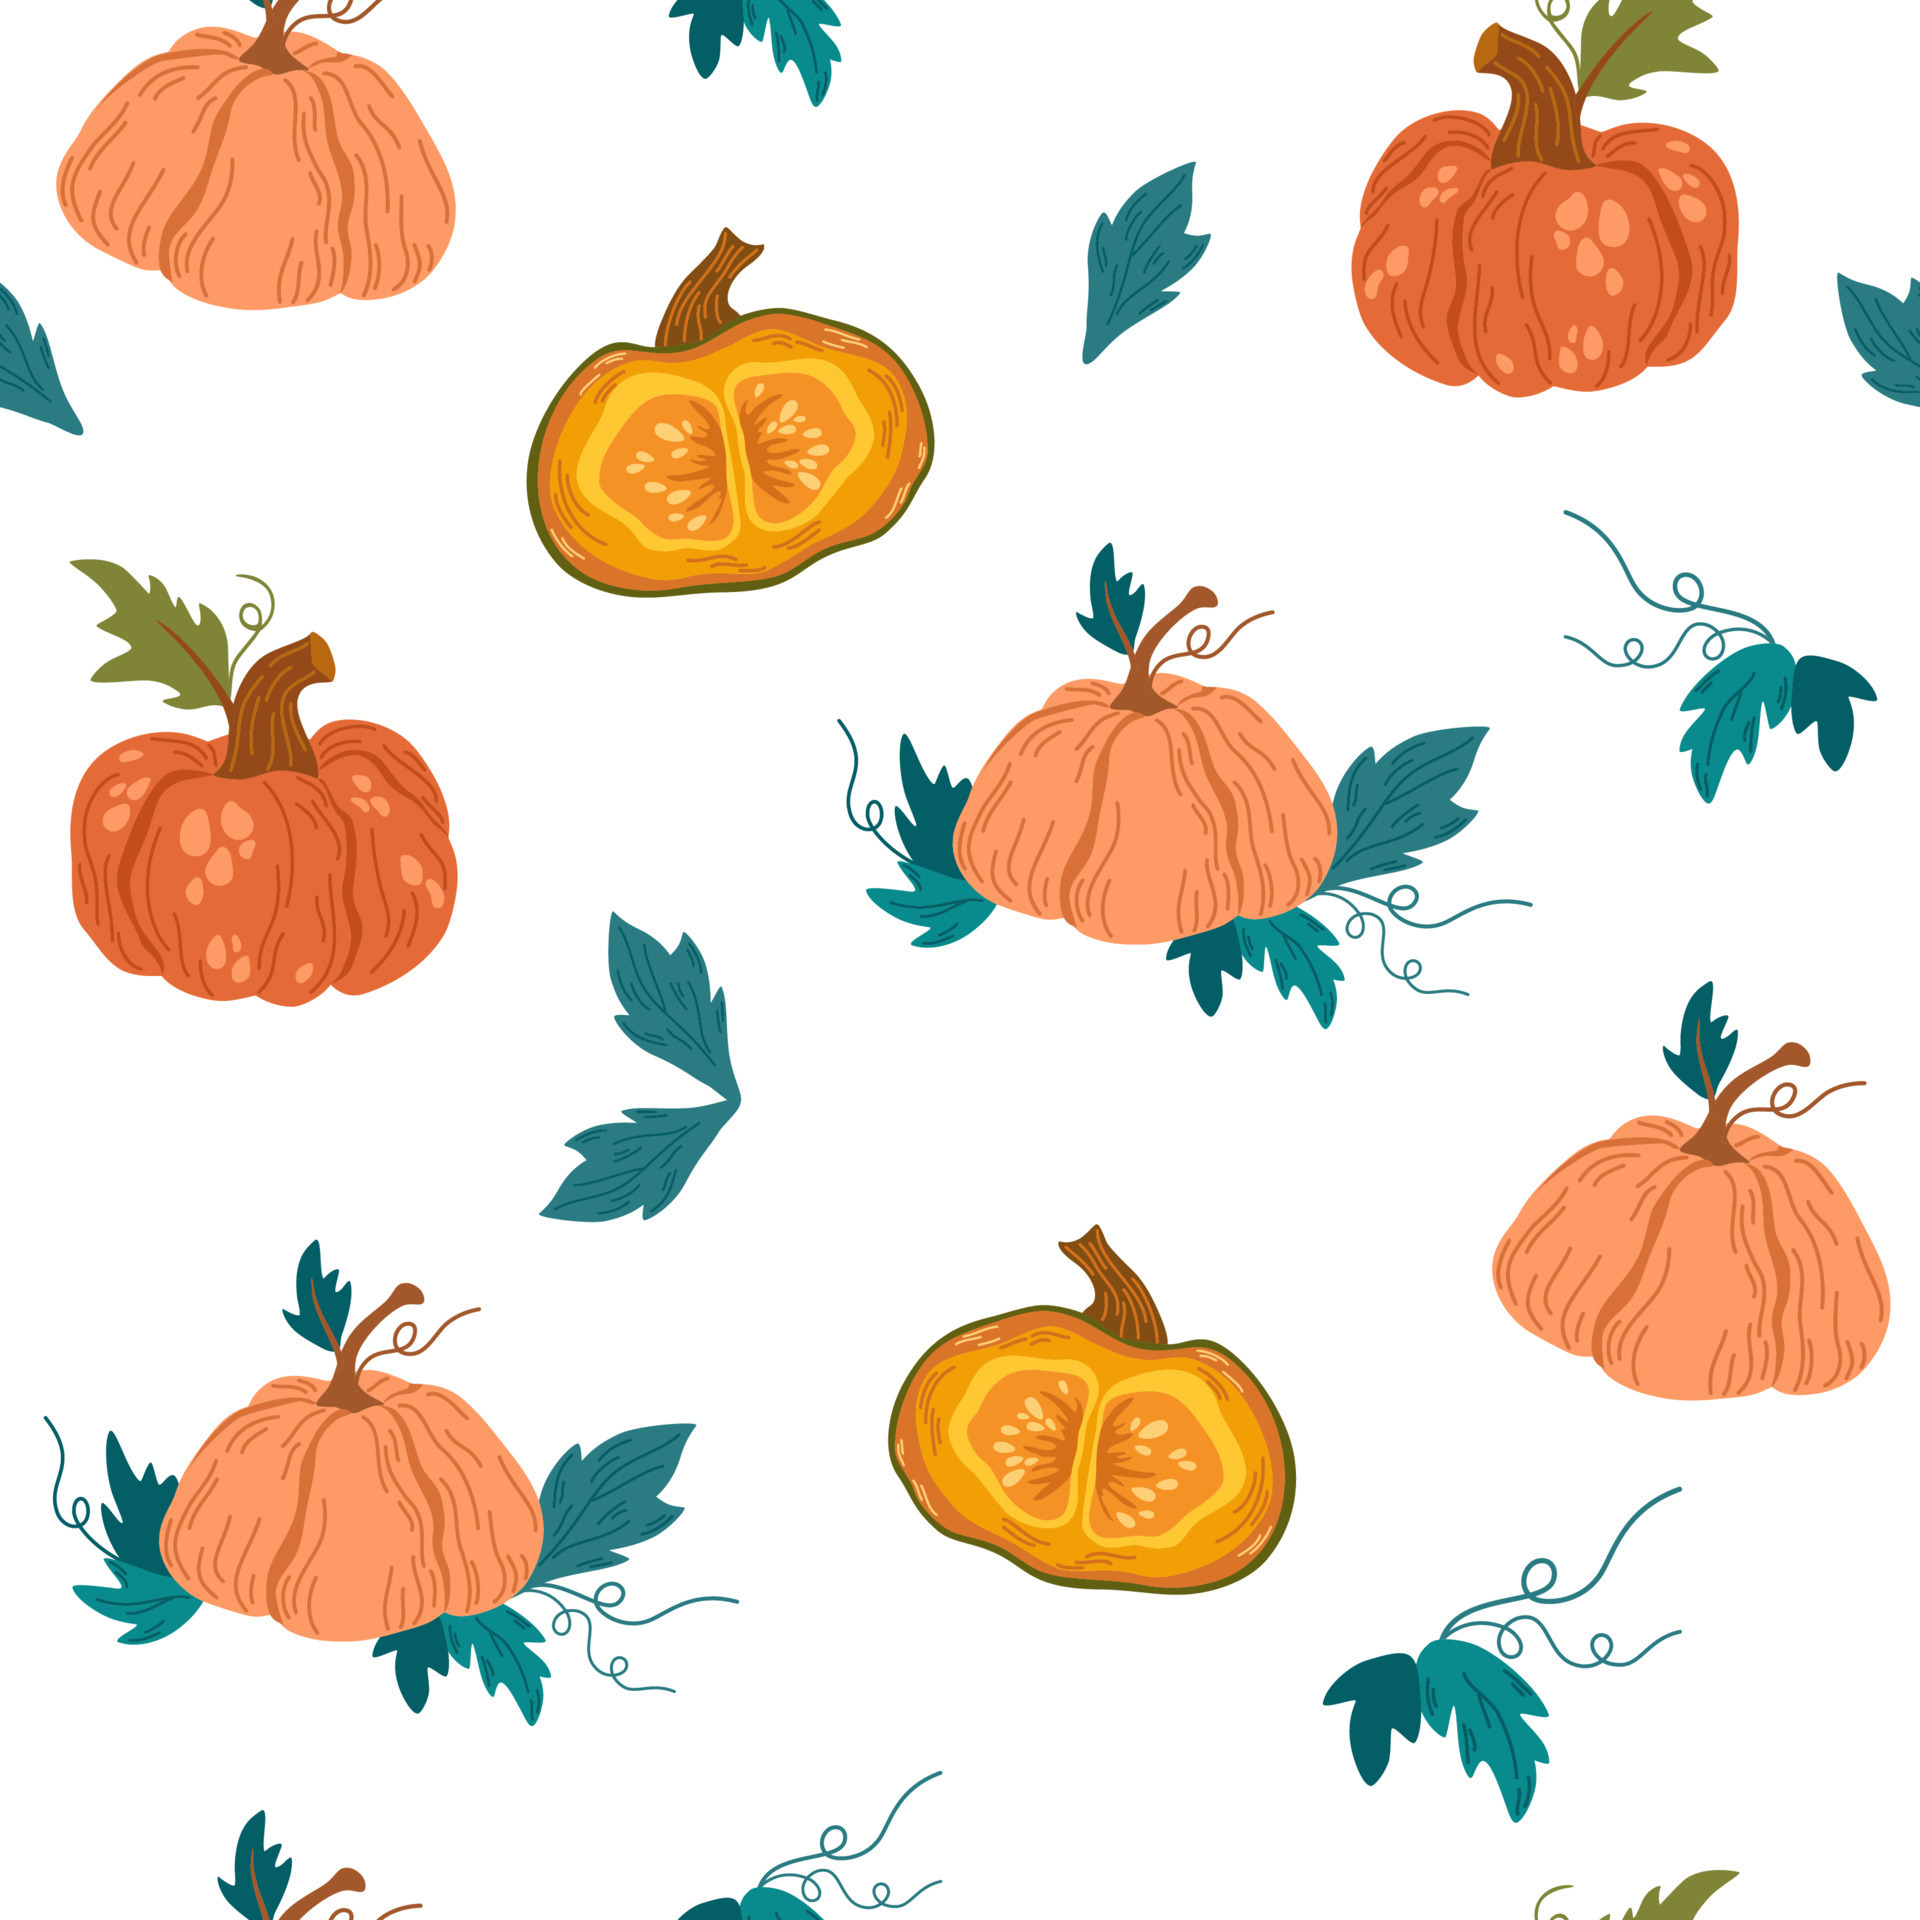 Autumn Leaves And Pumpkins Wallpapers - Wallpaper Cave